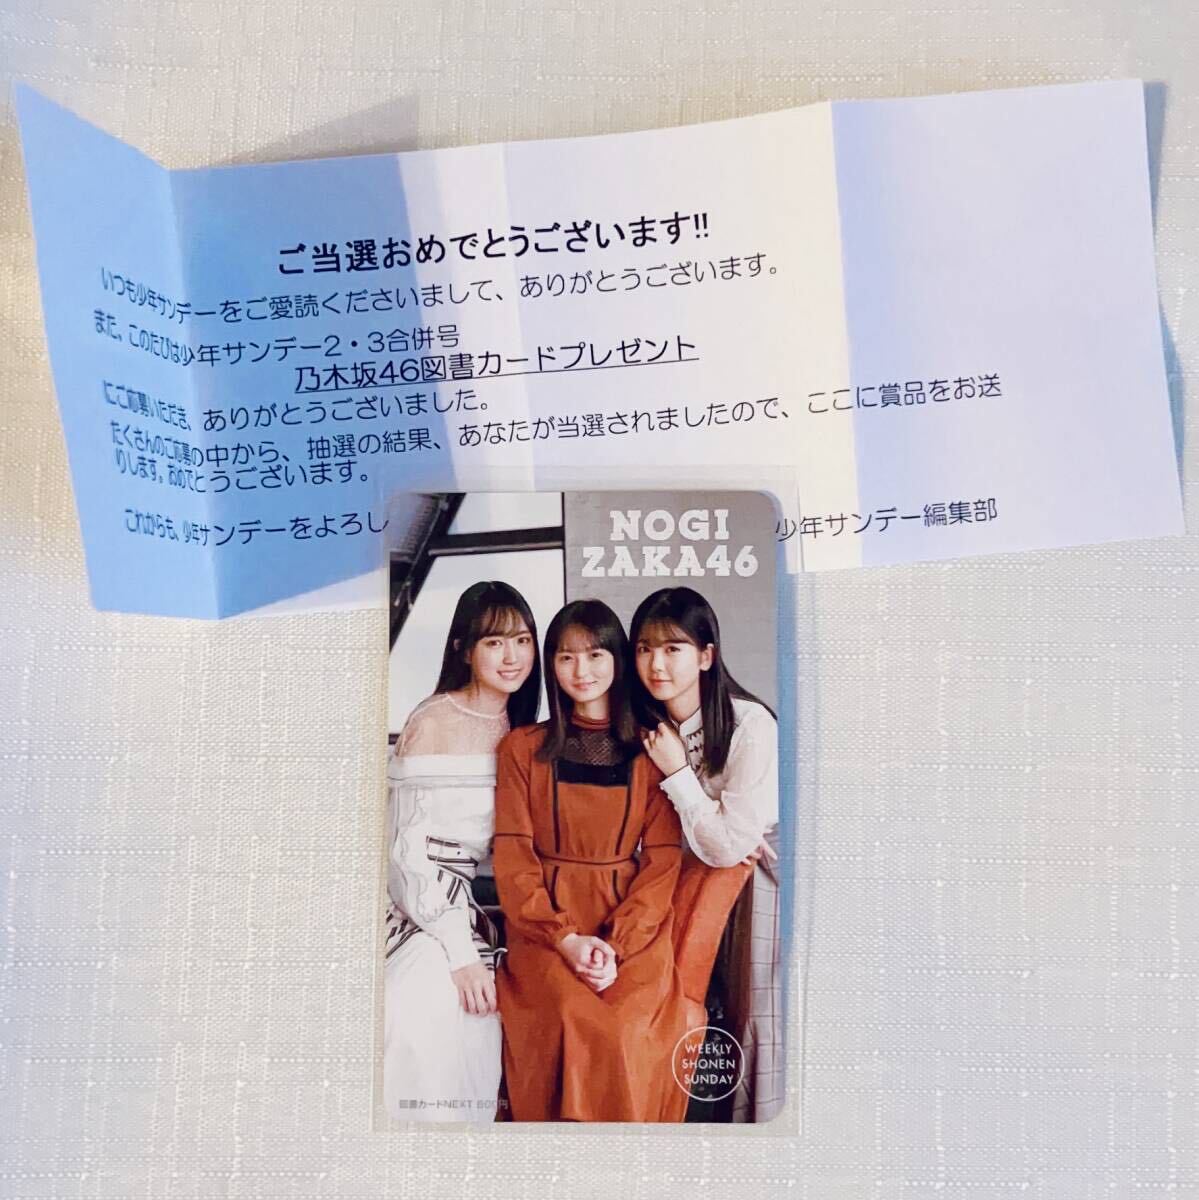  Nogizaka 46....*. wistaria Sakura * tube .... Toshocard ④ Shonen Sunday elected goods! present selection certificate equipped 500 new goods unused ( Chance is flat etc. )